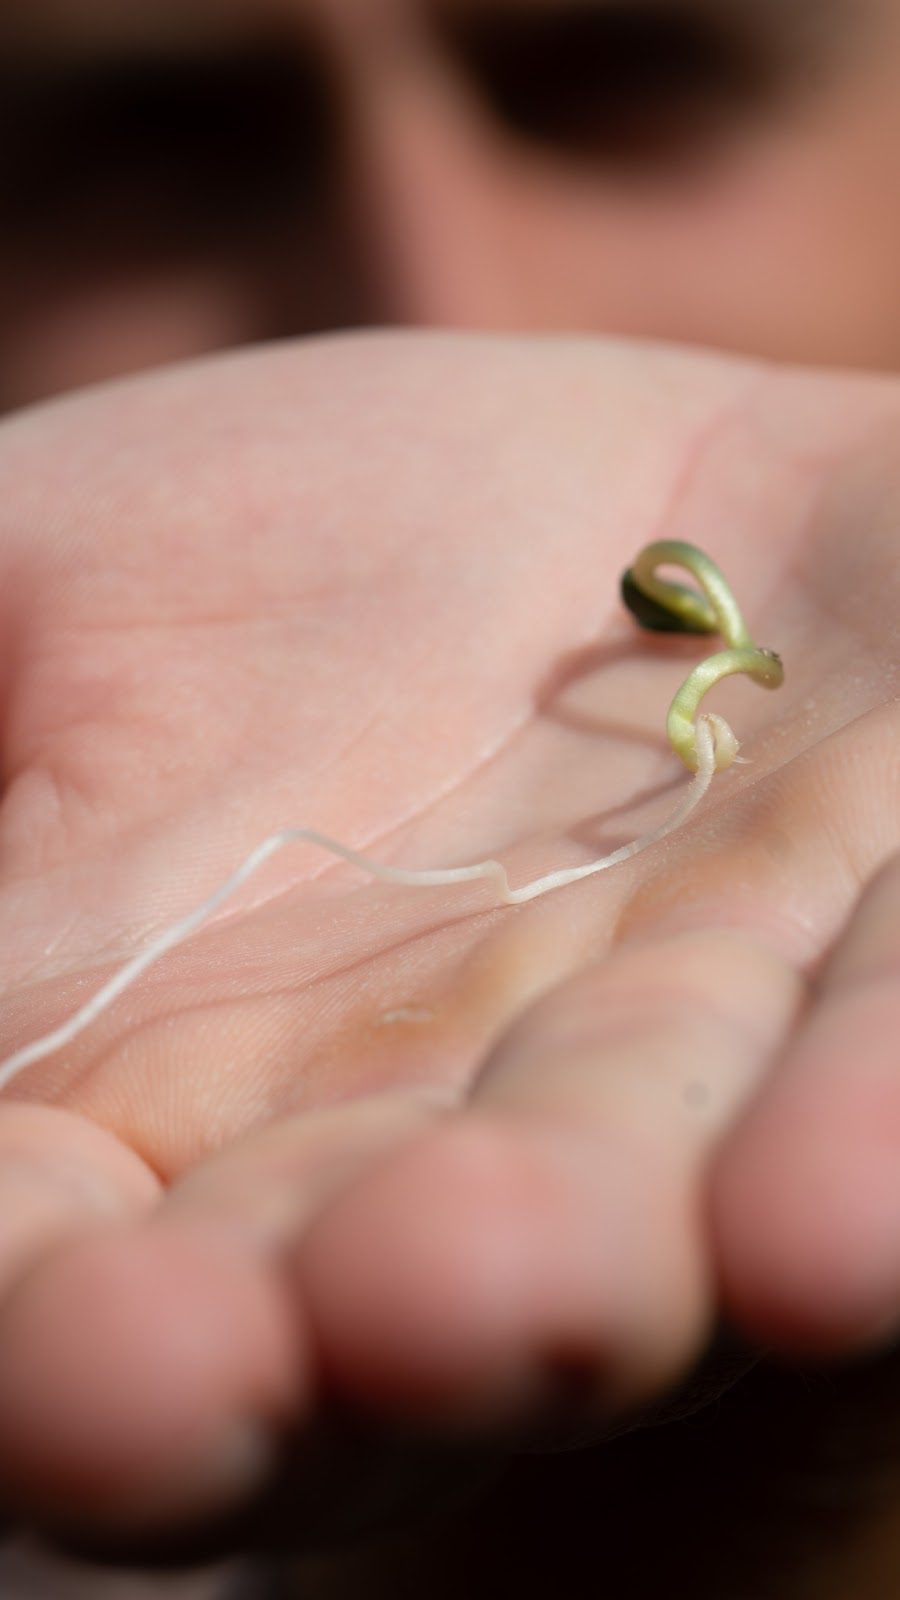 germinating seed in a palm